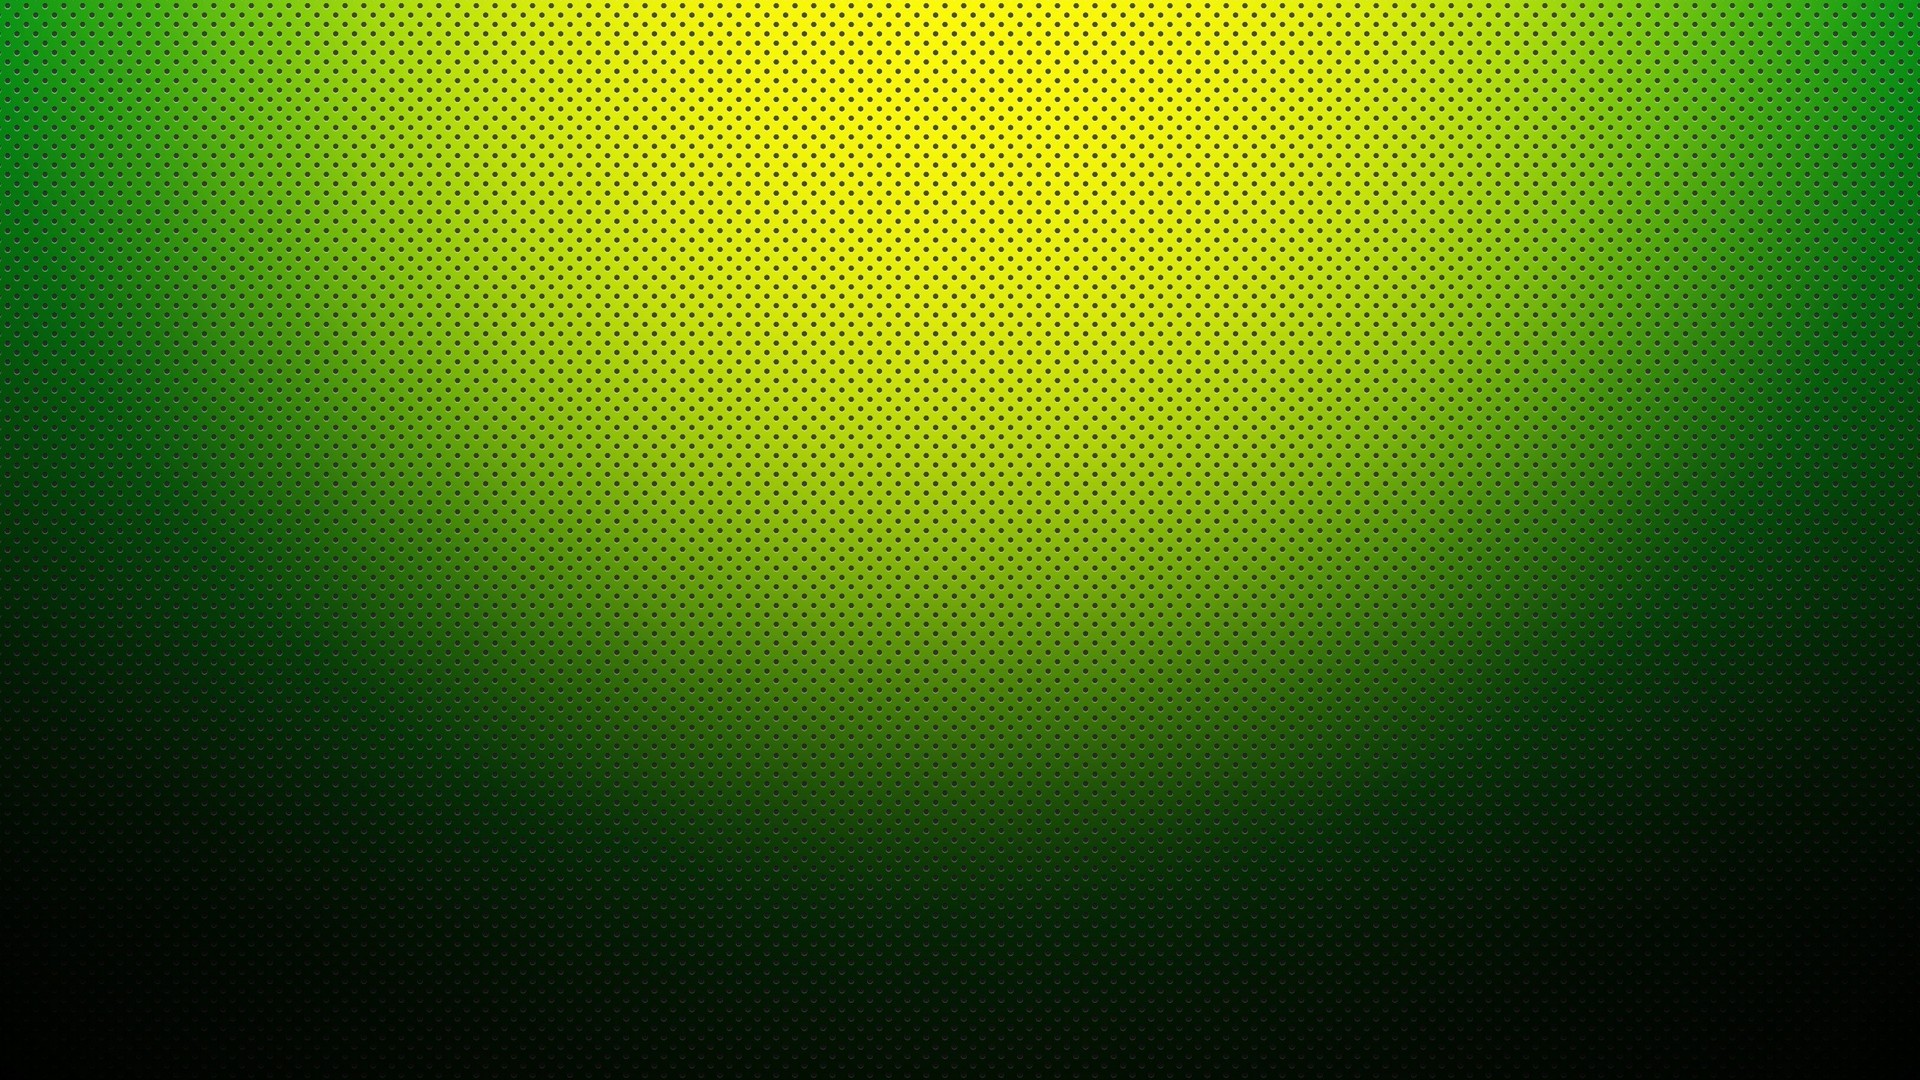 Lime Green Desktop Backgrounds With Resolution 1920X1080 pixel. You can make this wallpaper for your Desktop Computer Backgrounds, Mac Wallpapers, Android Lock screen or iPhone Screensavers